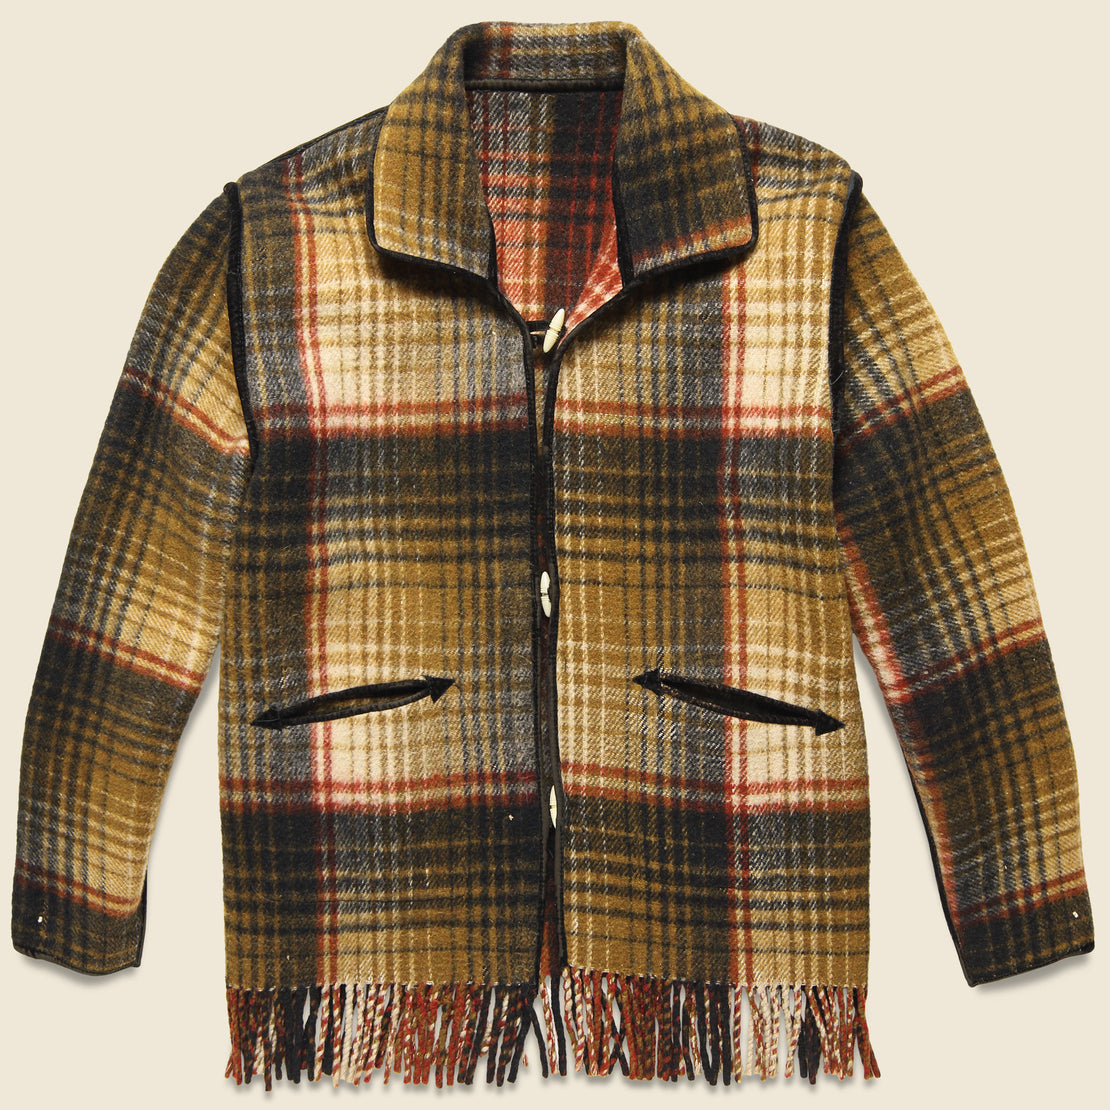 Reversible Plaid Jacket - Brown/Red/Mustard/Black - Vintage - STAG Provisions - One & Done - Apparel